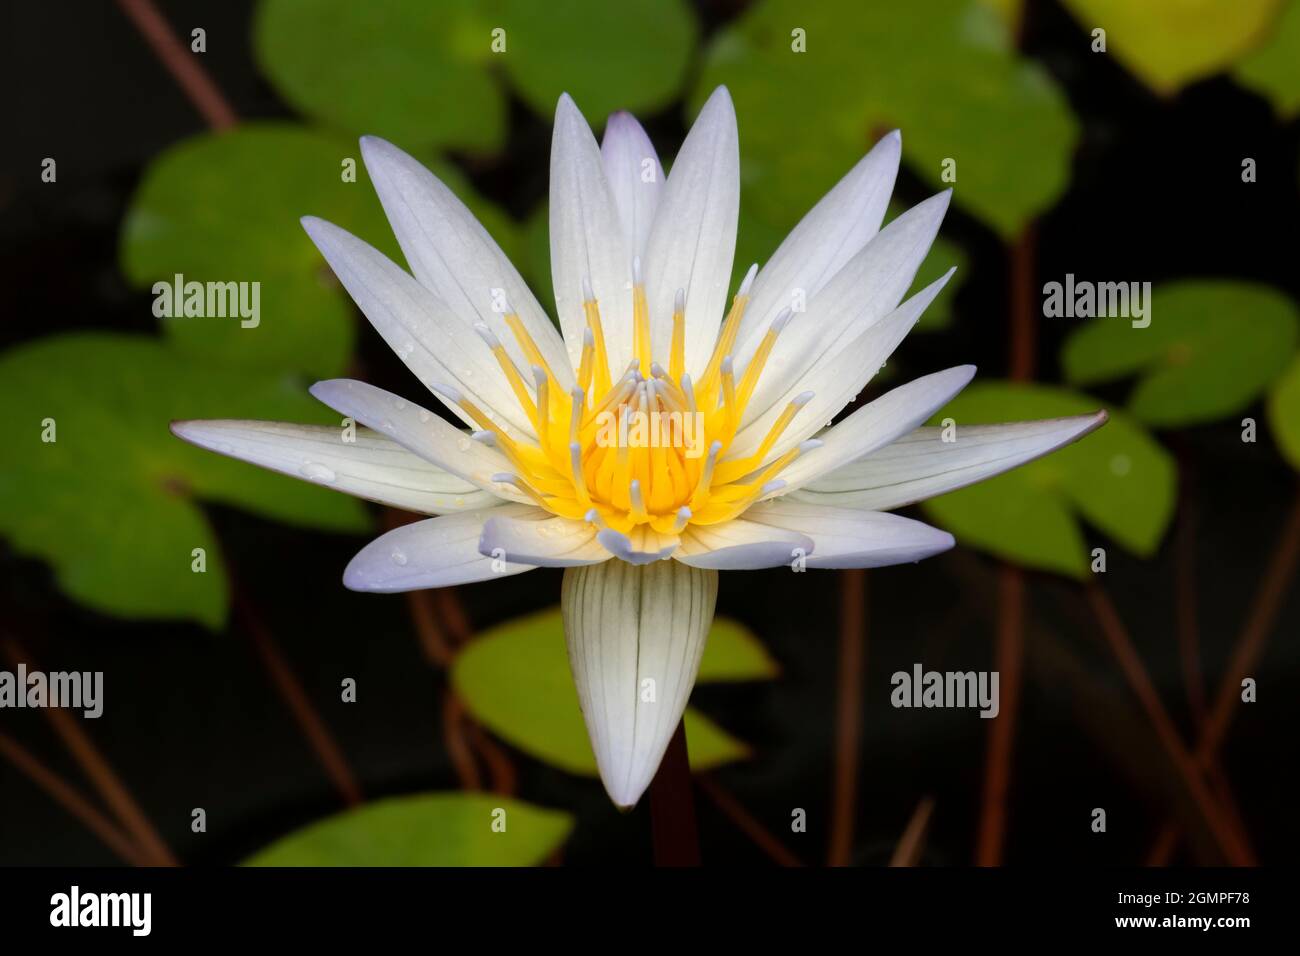 Single Water lily flower flower close up Stock Photo